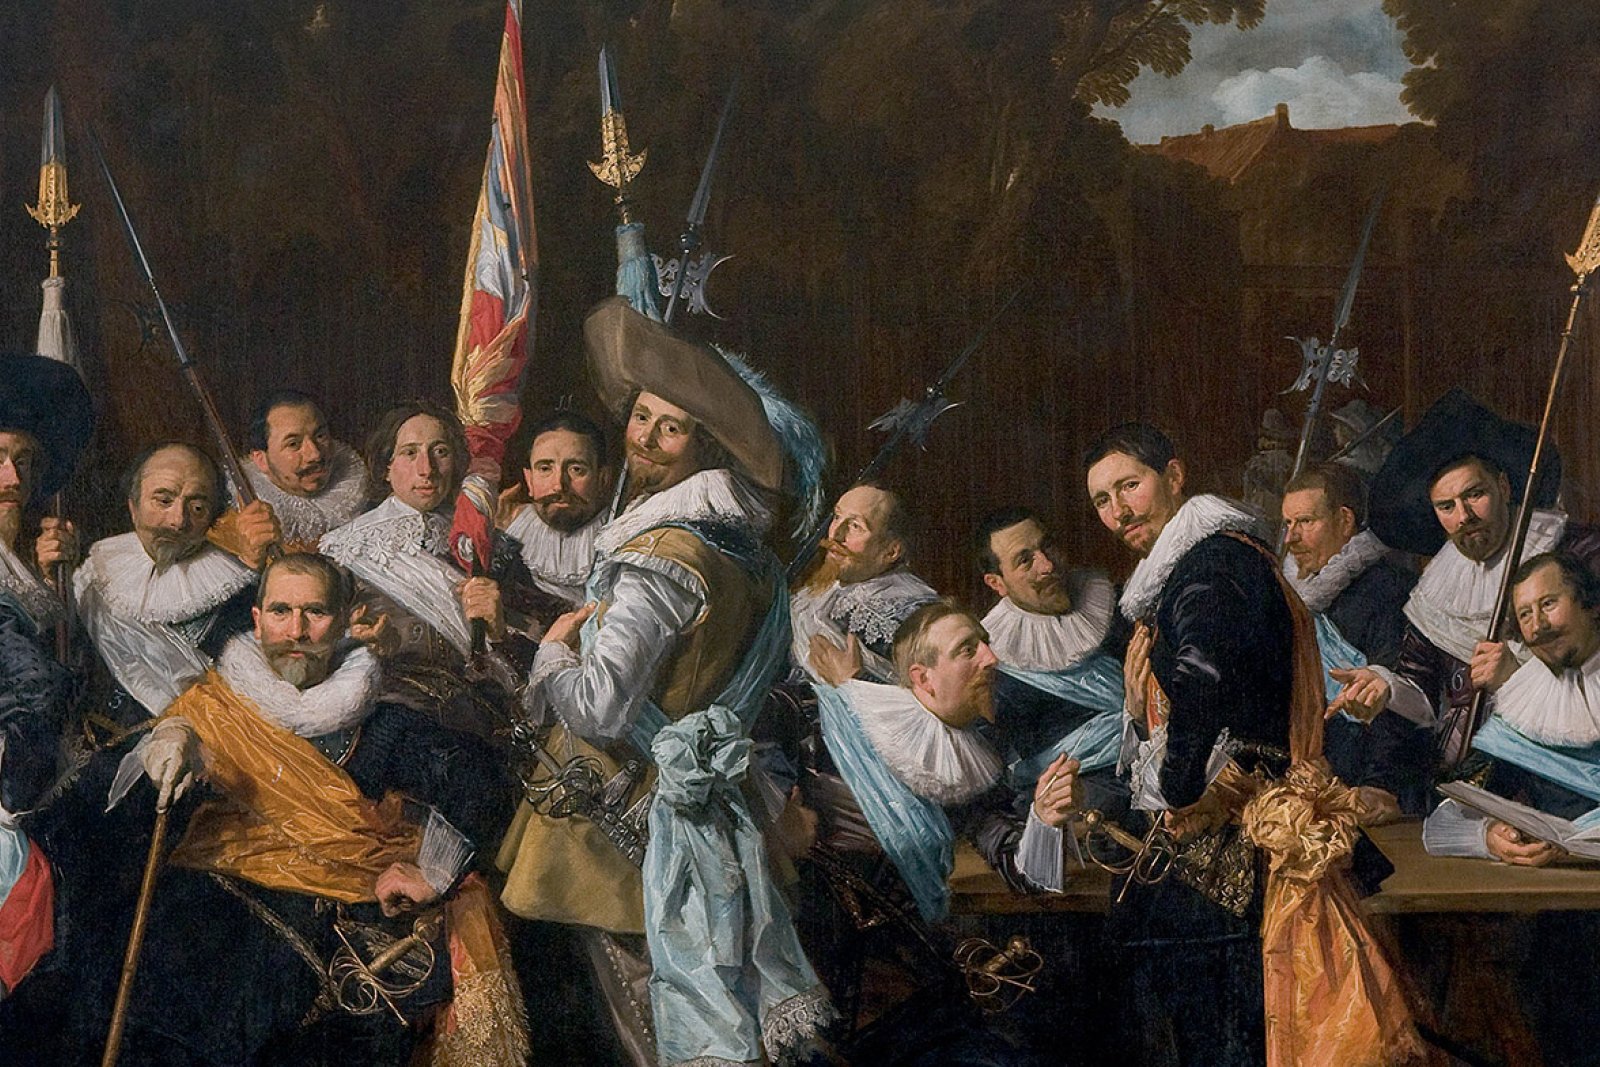 Officers and sub-alterns of the Calivermen Civic Guard, Frans Hals Museum, Haarlem